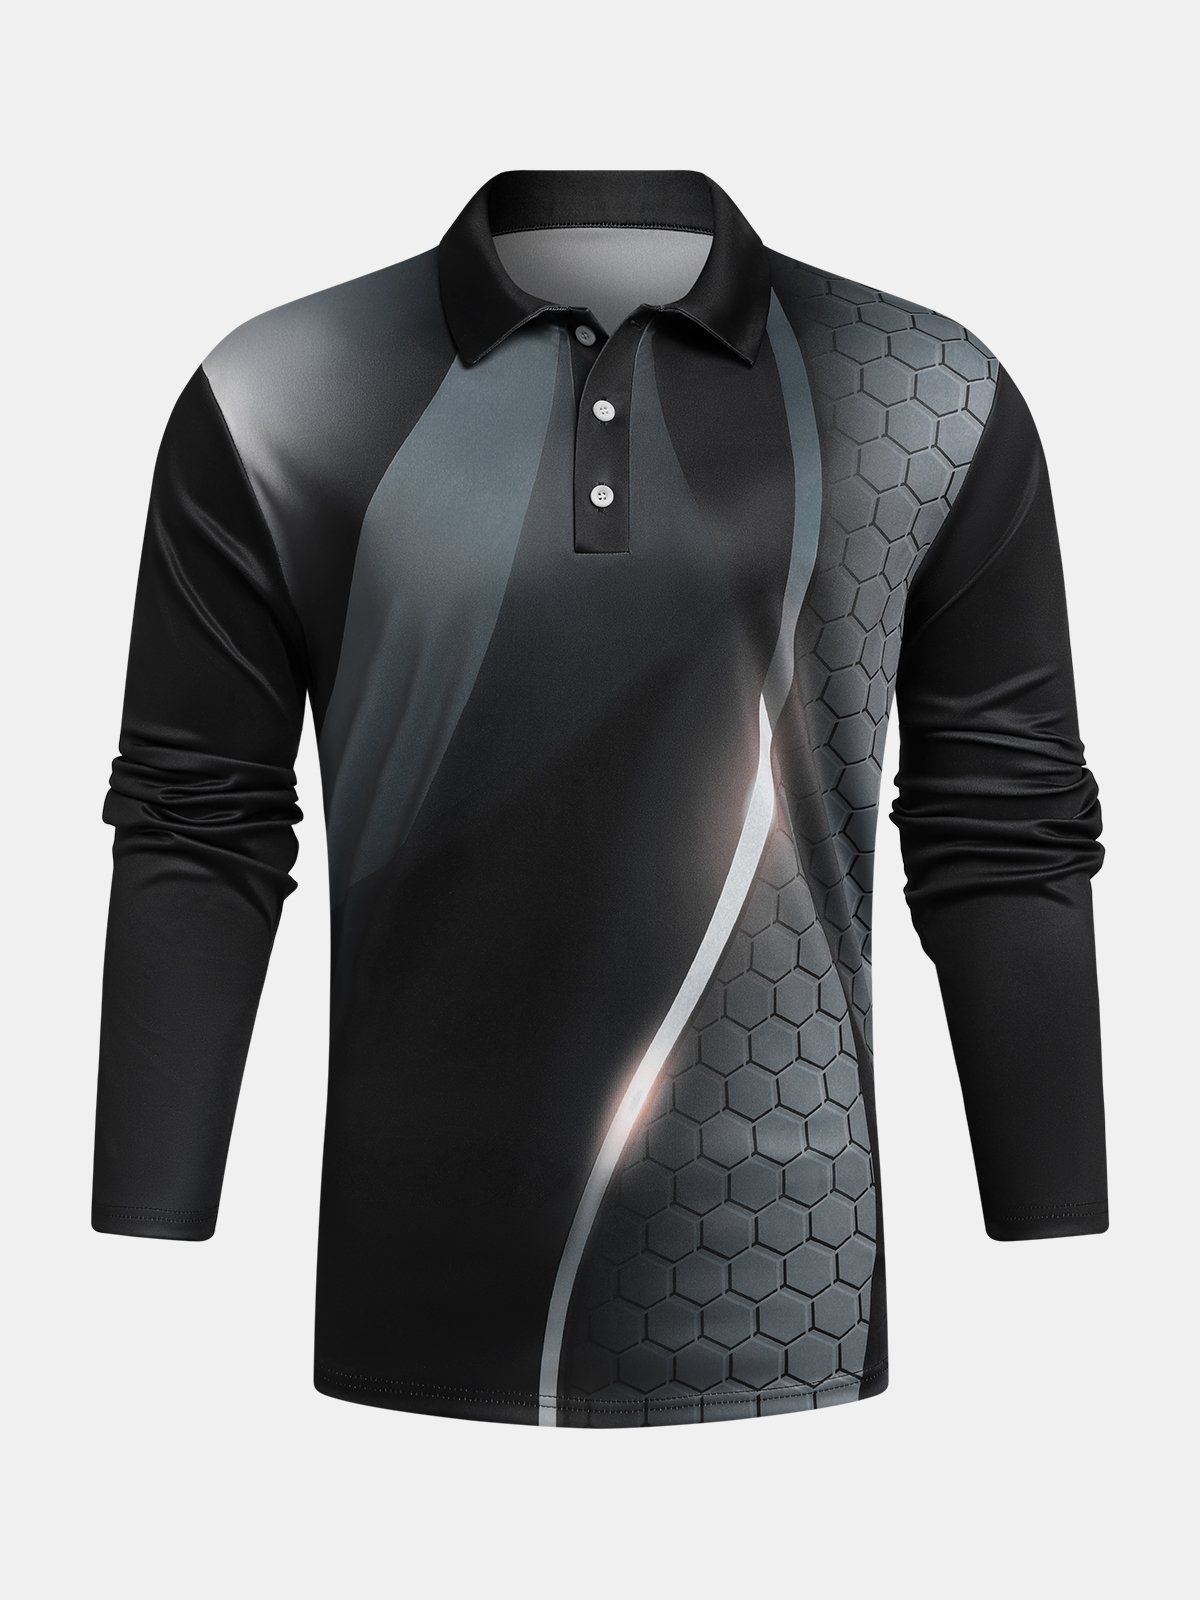 Hardaddy Casual Art Collection 3D Gradient Striped Geometric Block Pattern Lapel Button Long Sleeve Print Polo Shirt